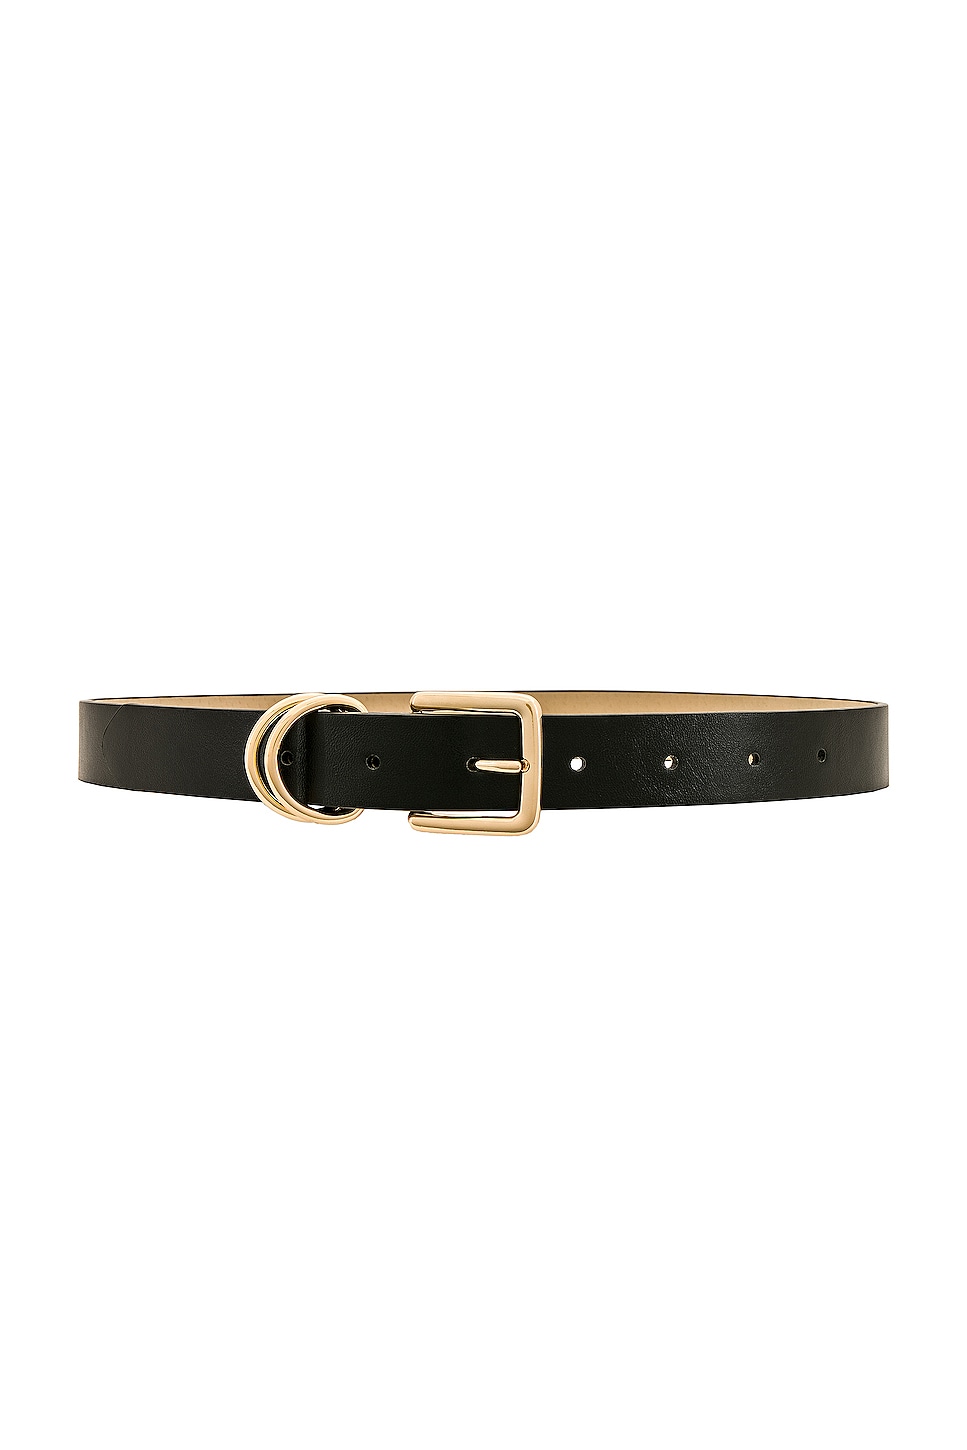 Lovers and Friends Molly Belt in Black & Gold | REVOLVE